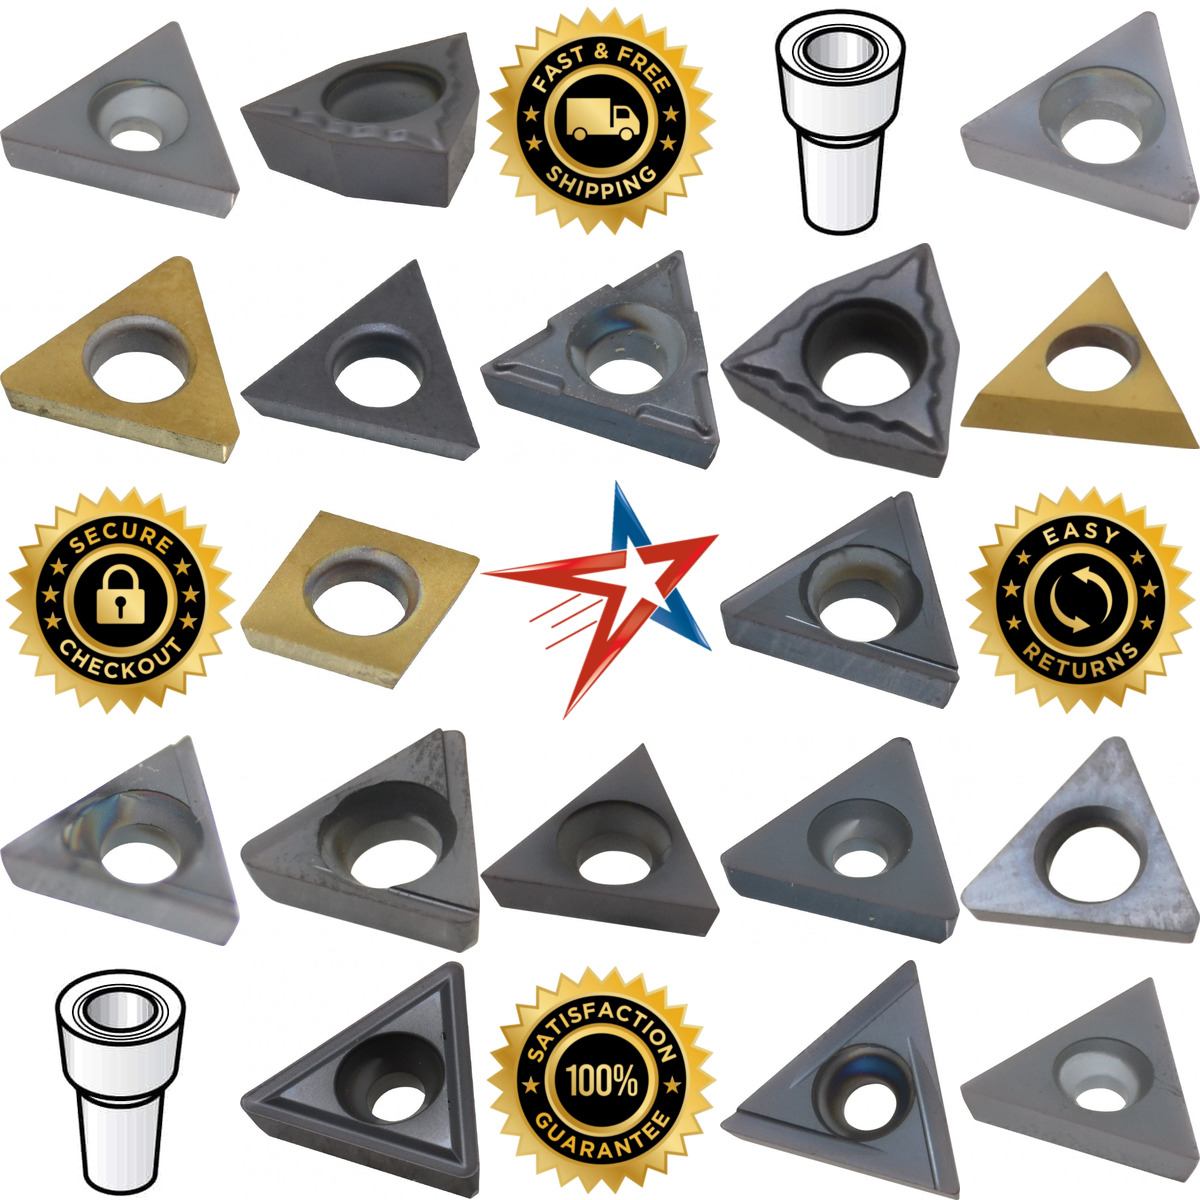 A selection of Kennametal products on GoVets